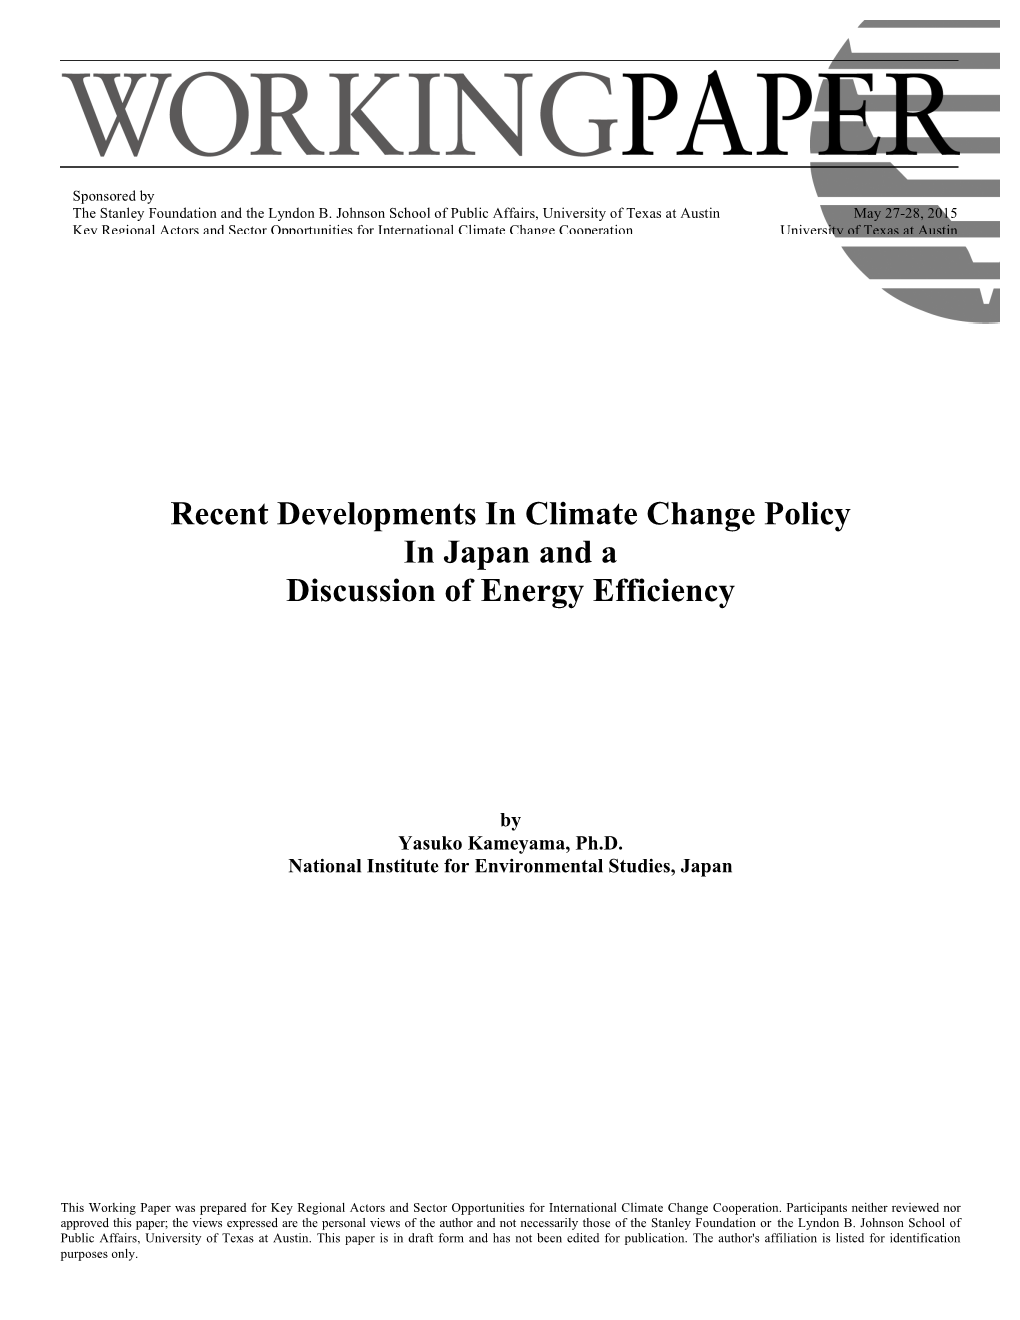 Recent Developments in Climate Change Policy in Japan and a Discussion of Energy Efficiency